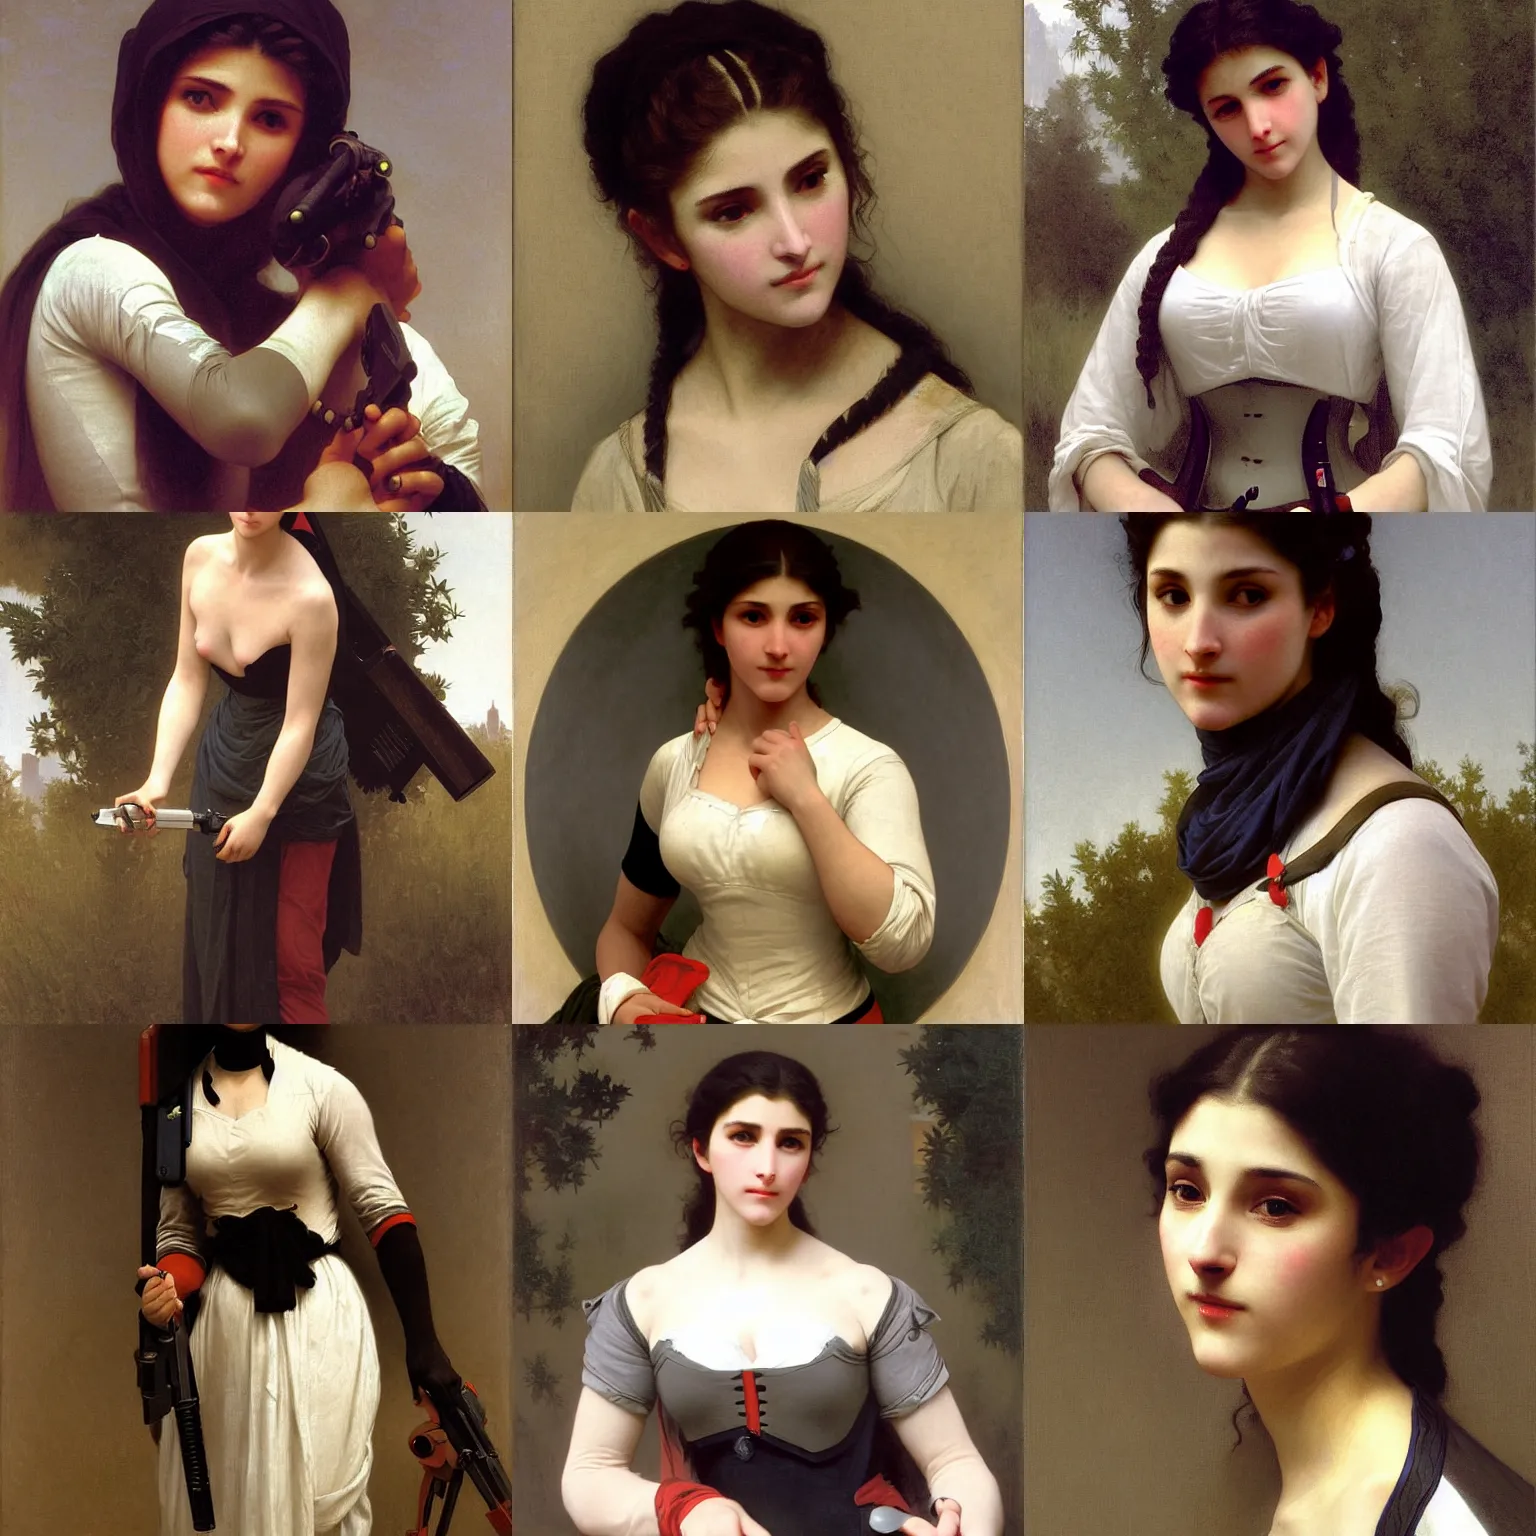 Prompt: overwatch widow, painted by William-Adolphe Bouguereau